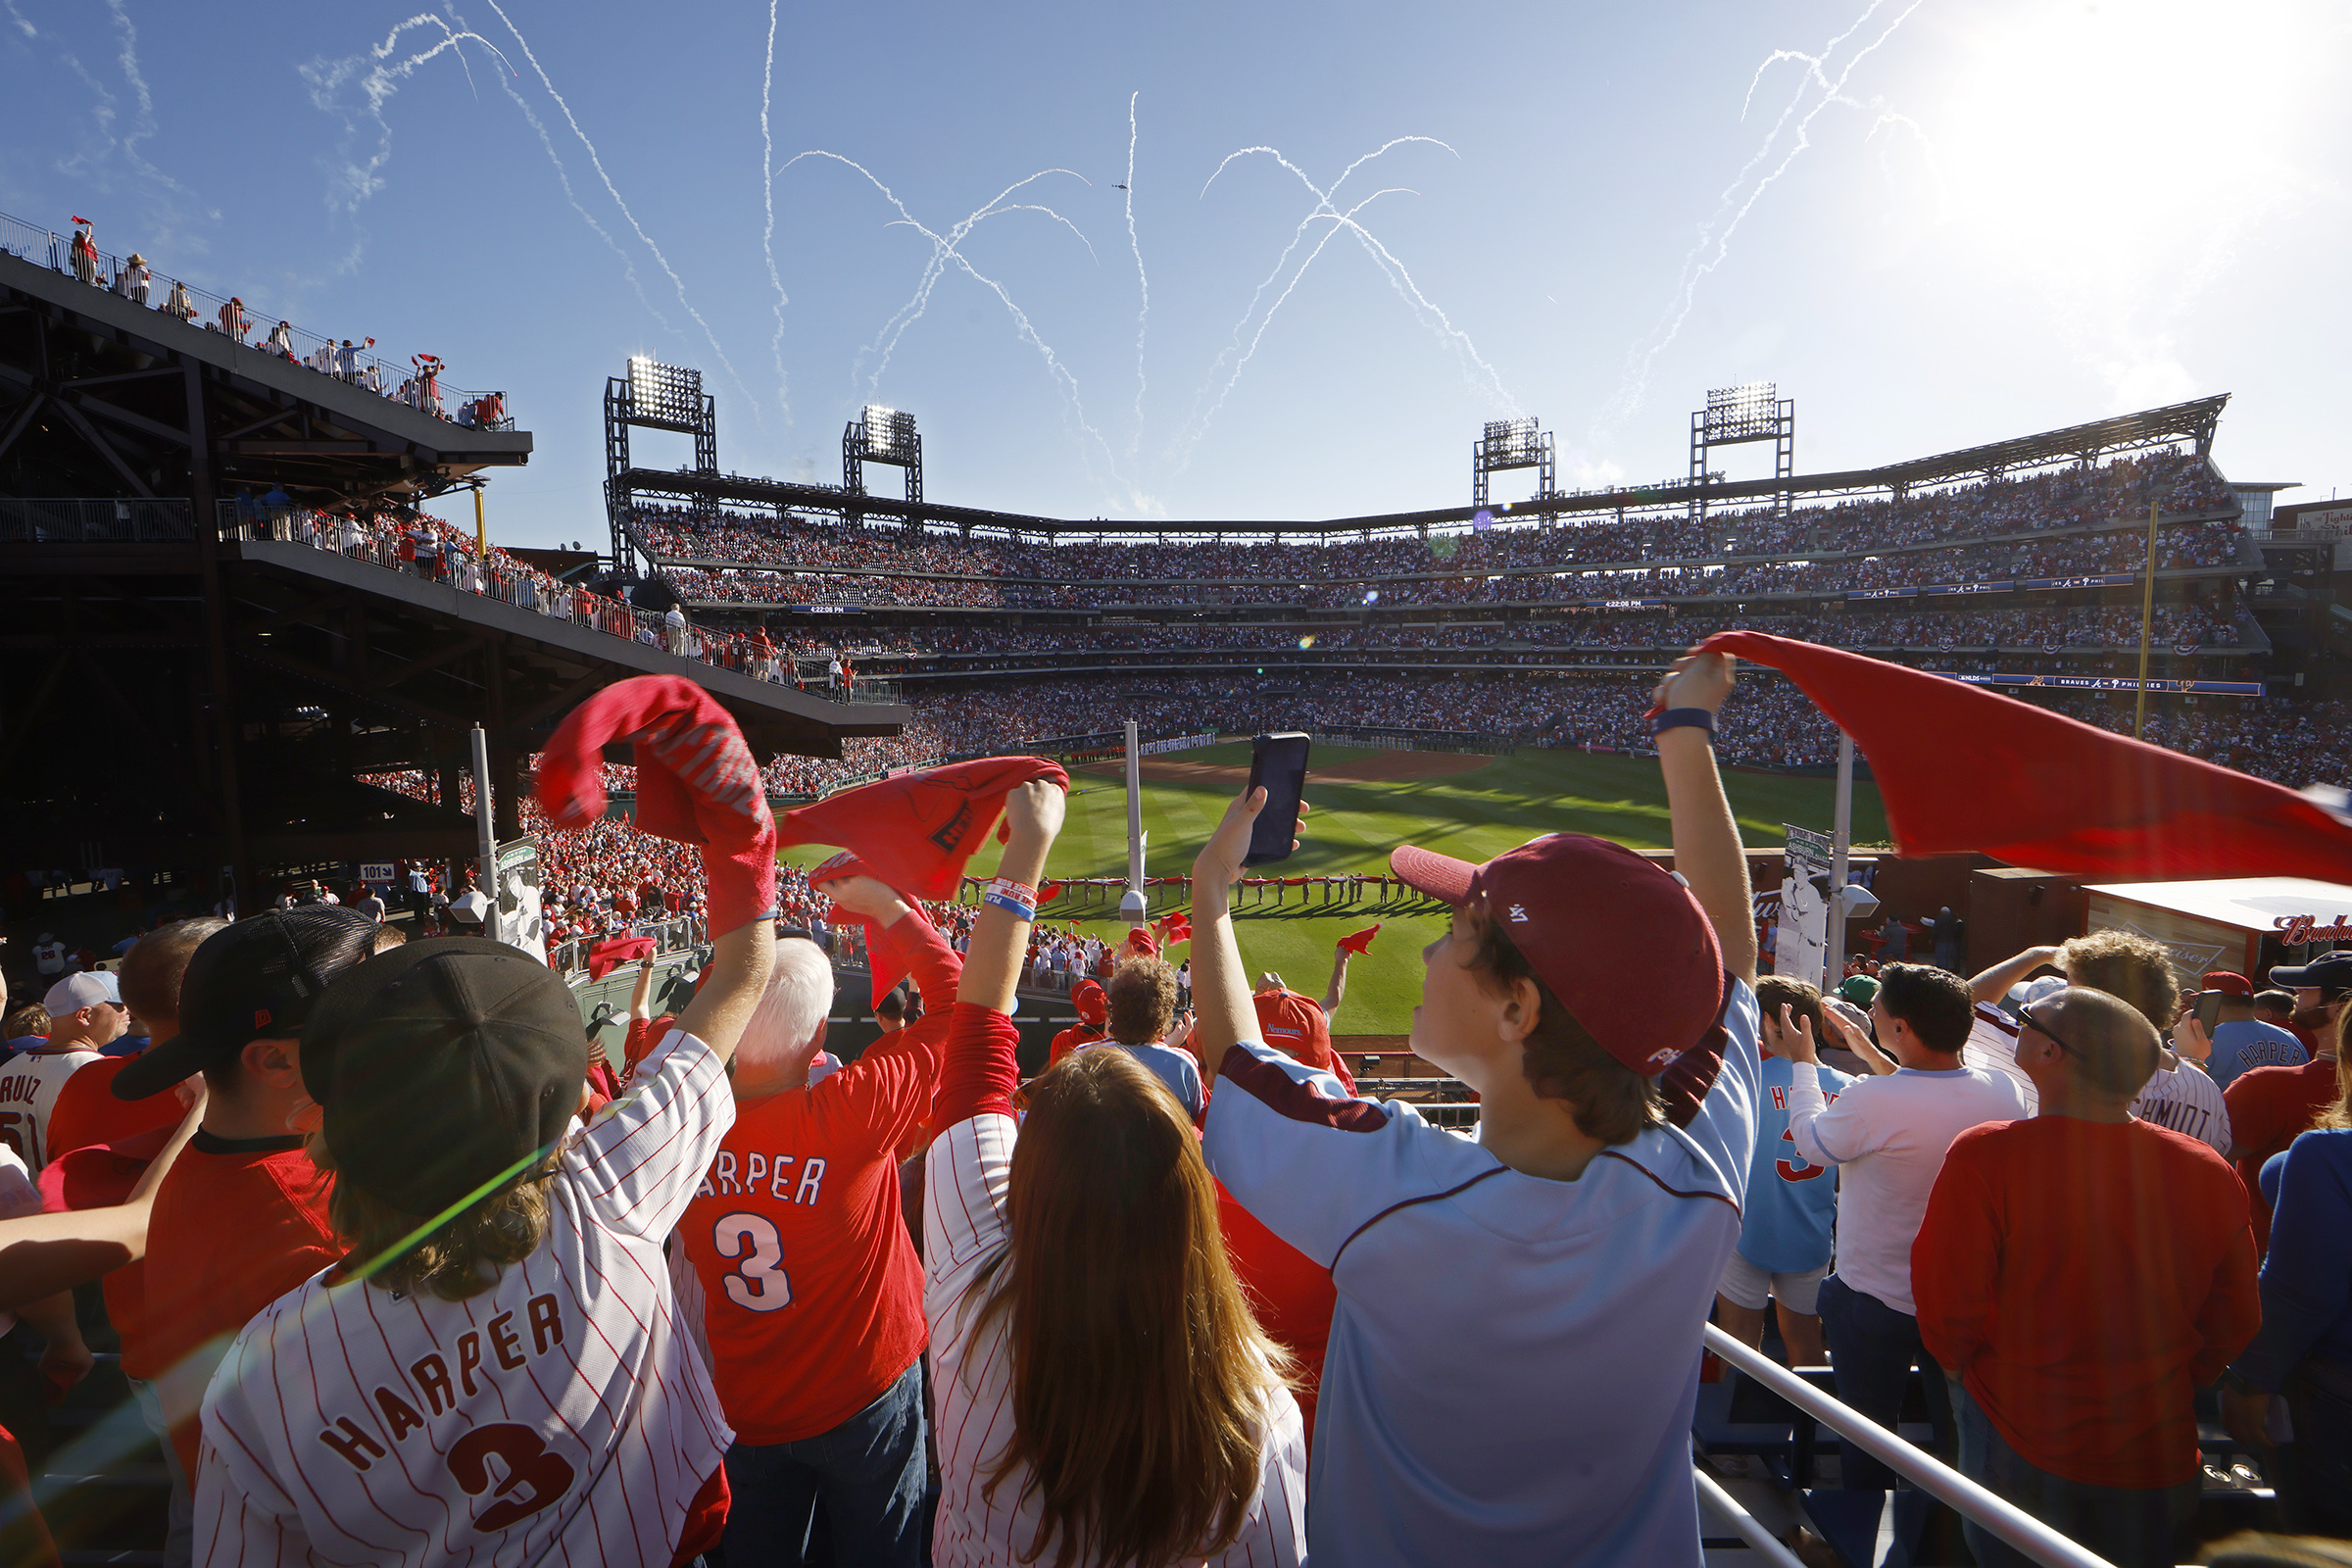 Phillies fans welcome back playoff baseball at Citizens Bank Park